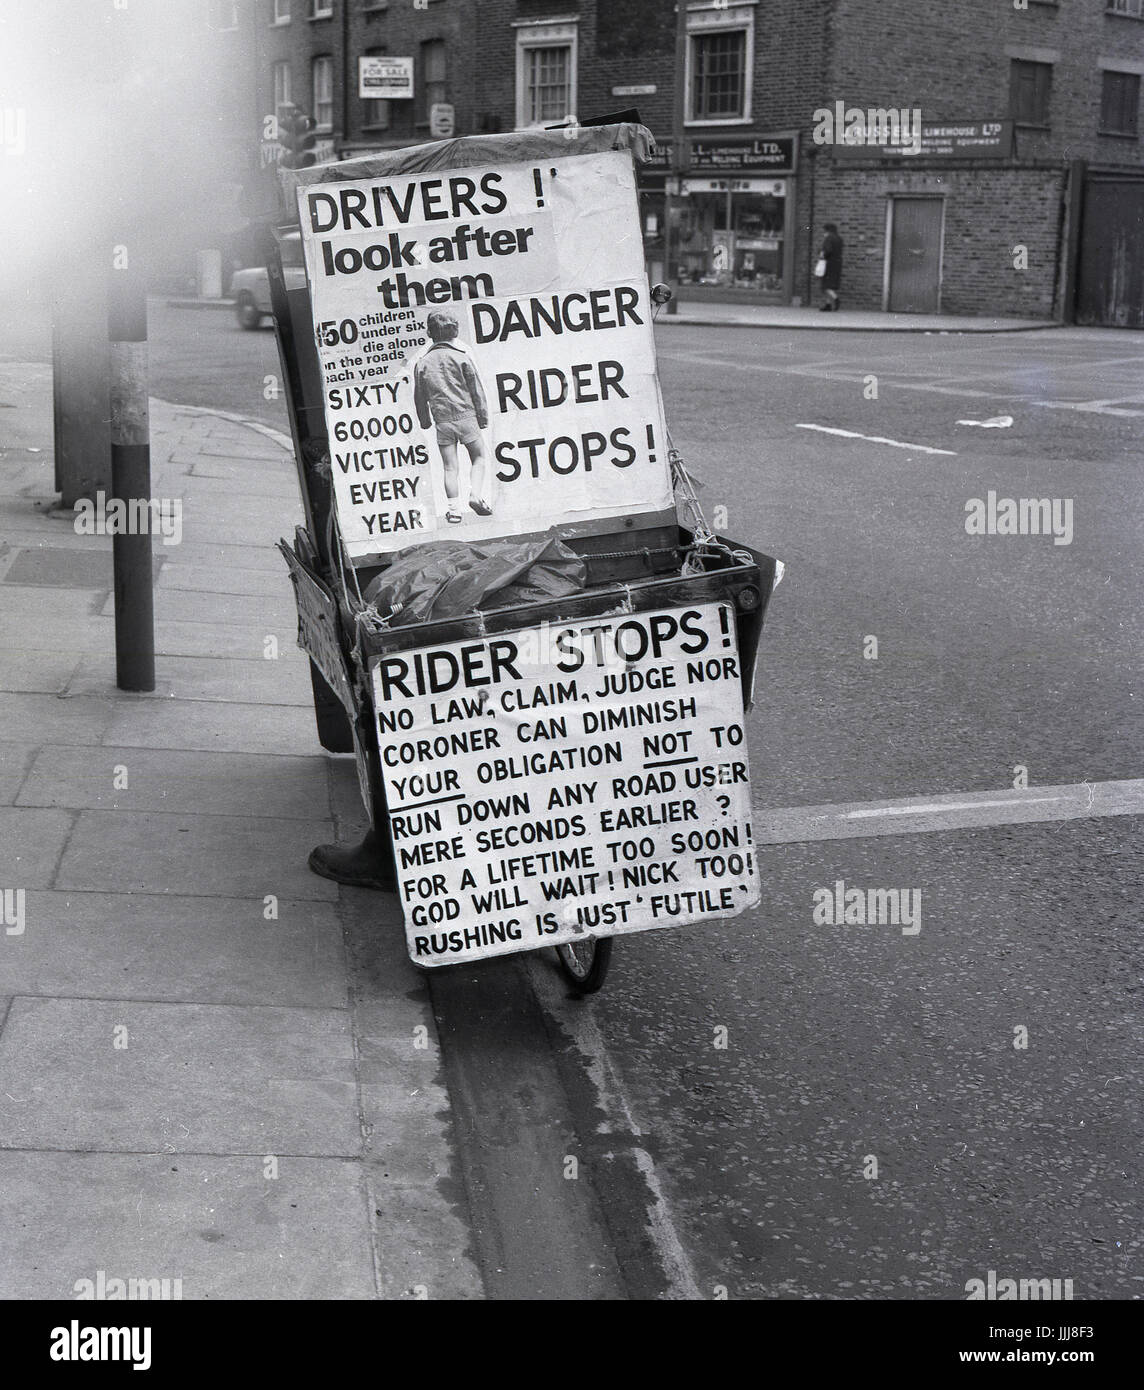 1971, Greenwich High Road, London, picture shows the eccentric Englishman and fervent poltical candidate Lt. Com William (Bill) Boaks on his 'campaign bus', a bicycle covered with placards and signs about road safety, a cause central to his beliefs.. Stock Photo